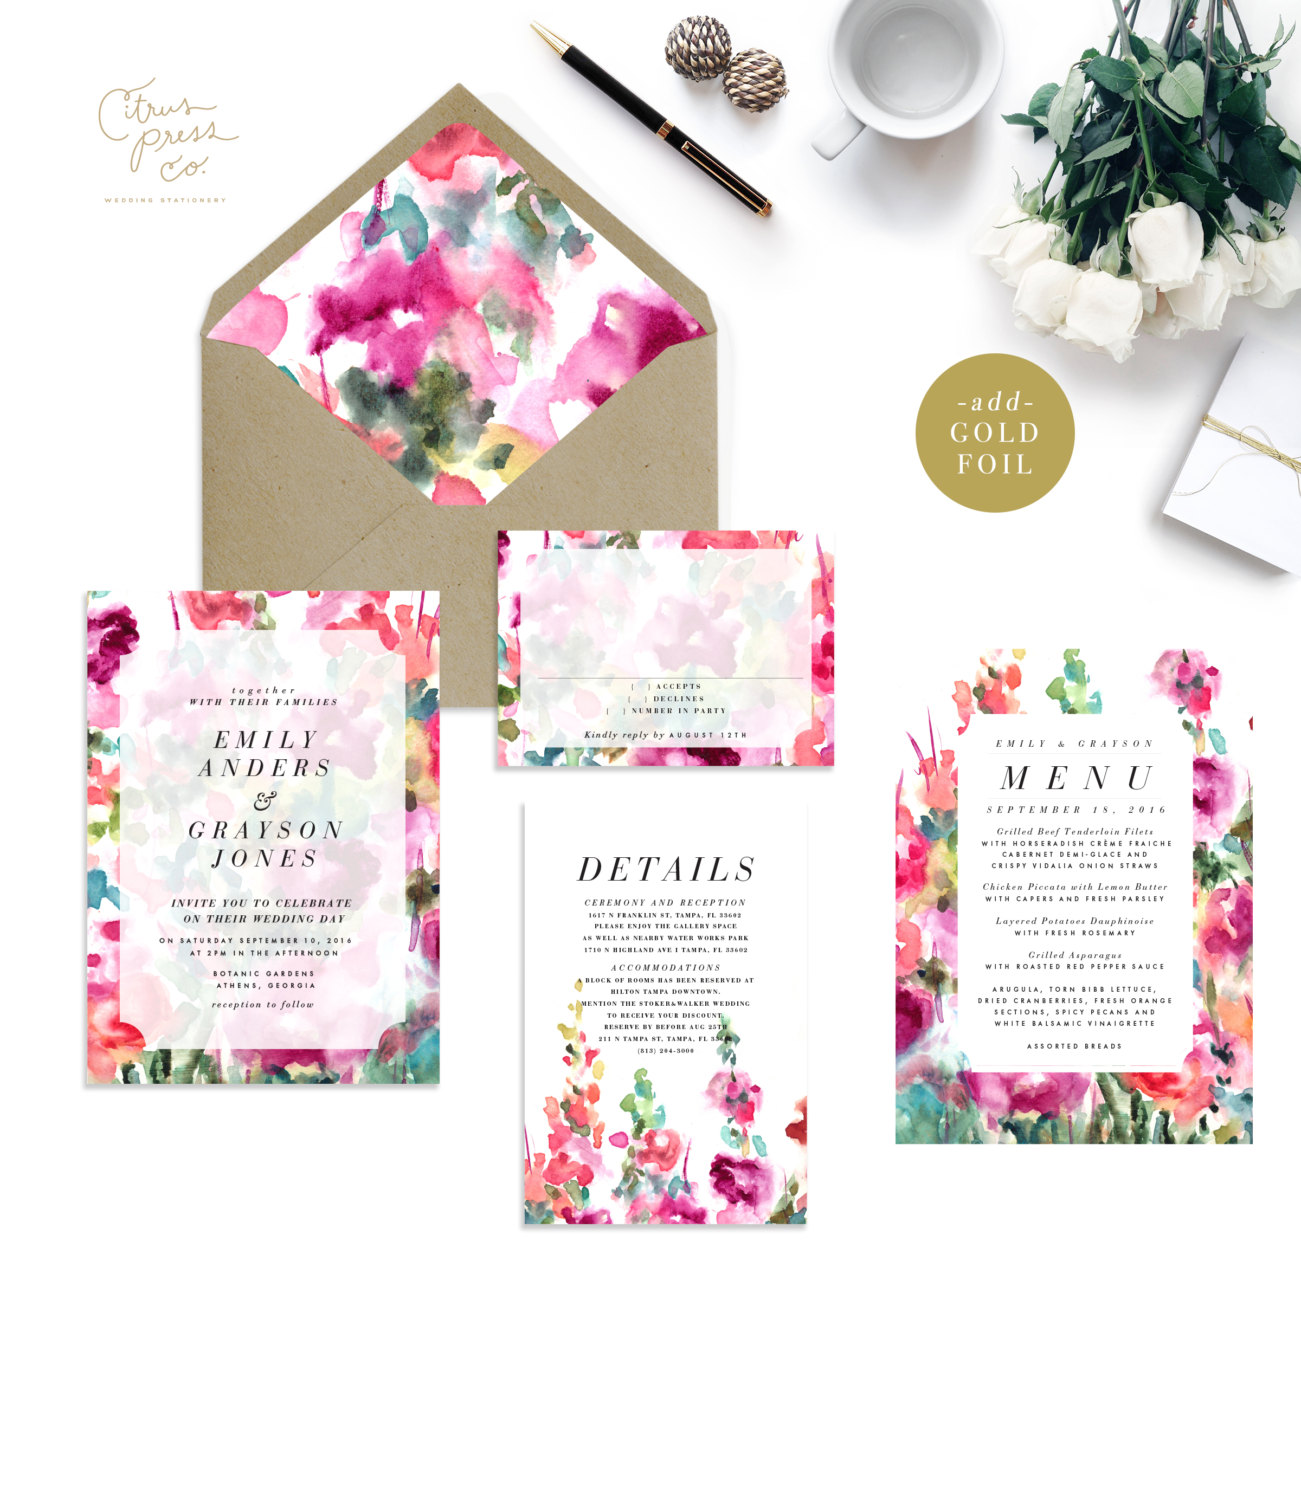 spring garden wedding invitations | 6 Floral Botanical Invitations for Spring Weddings http://wp.me/p1g0if-yOx by Citrus Press Co.